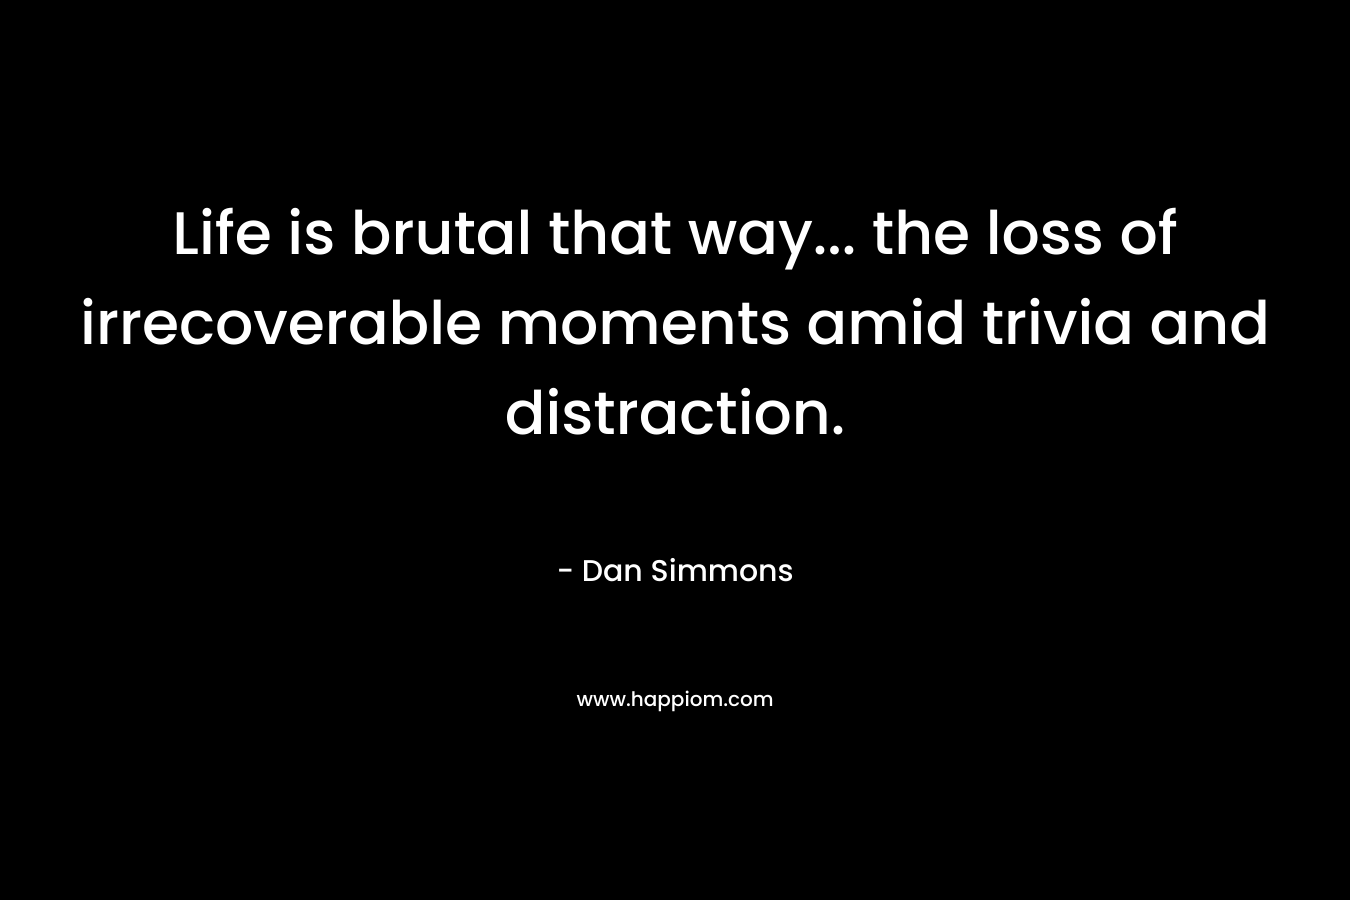 Life is brutal that way… the loss of irrecoverable moments amid trivia and distraction. – Dan Simmons